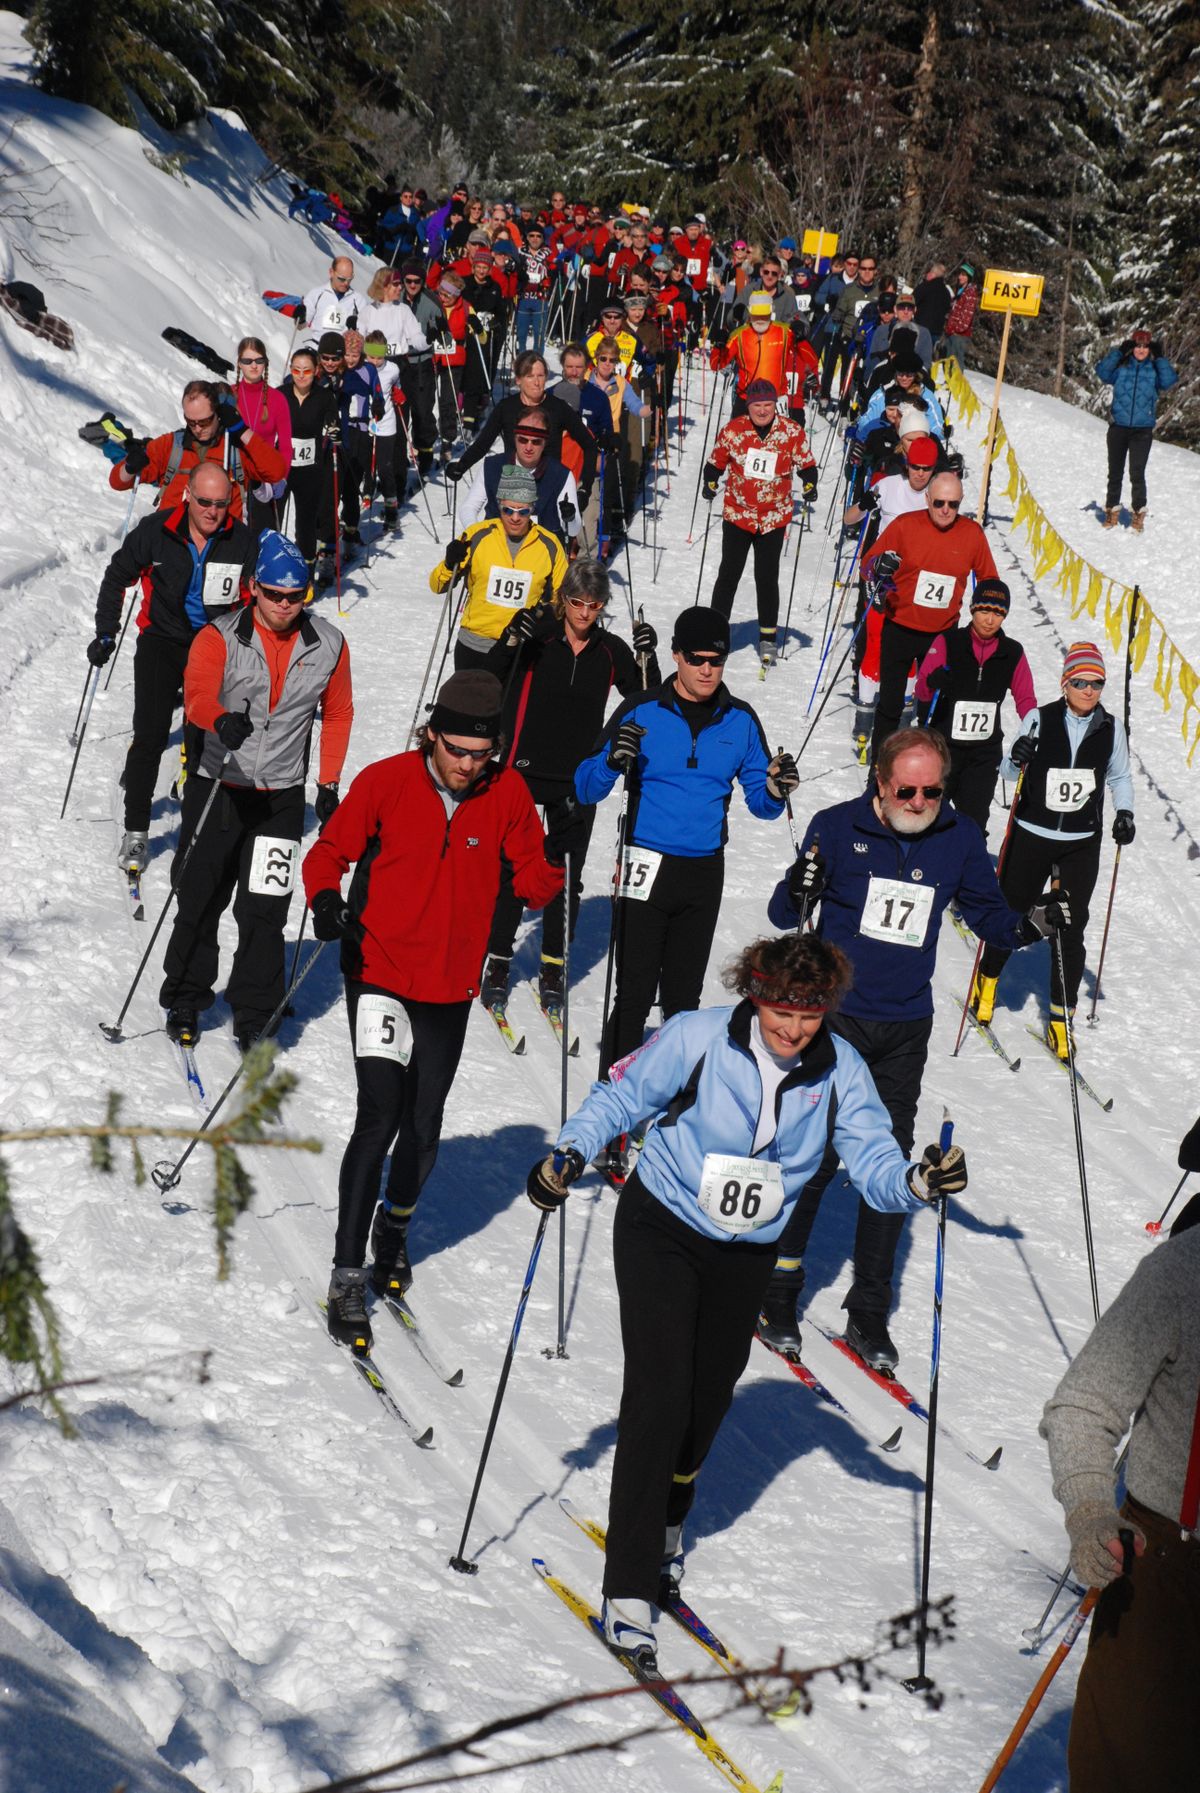 More than 220 skiers take off at the start of the Langlauf 10-kilometer cross-country ski race at Mount Spokane.  (Rich Landers / The Spokesman-Review)